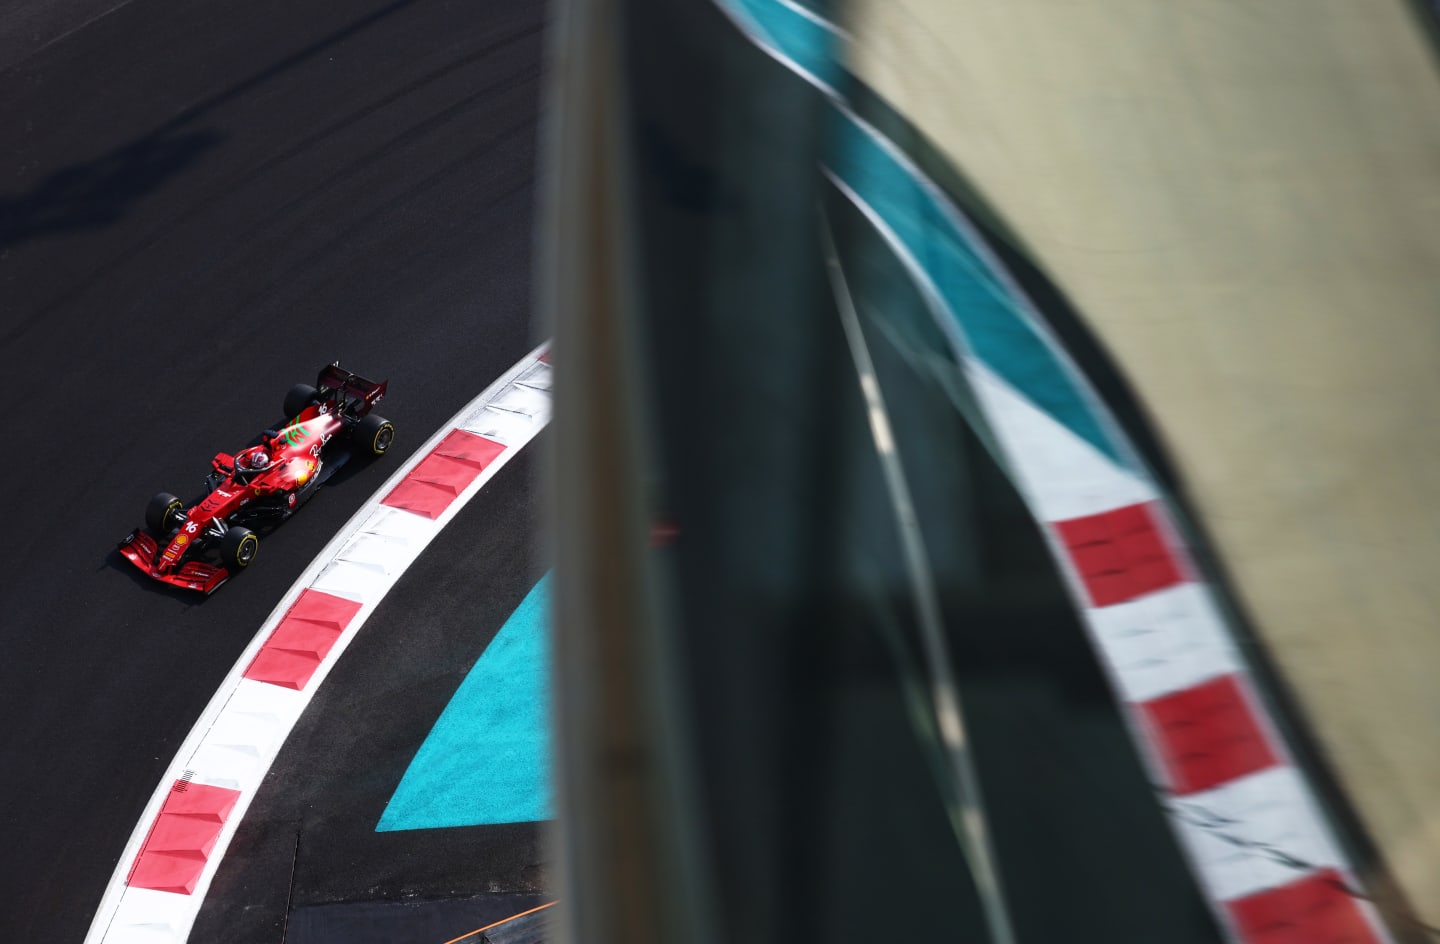 ABU DHABI, UNITED ARAB EMIRATES - DECEMBER 11: Charles Leclerc of Monaco driving the (16) Scuderia Ferrari SF21 during final practice ahead of the F1 Grand Prix of Abu Dhabi at Yas Marina Circuit on December 11, 2021 in Abu Dhabi, United Arab Emirates. (Photo by Mark Thompson/Getty Images)